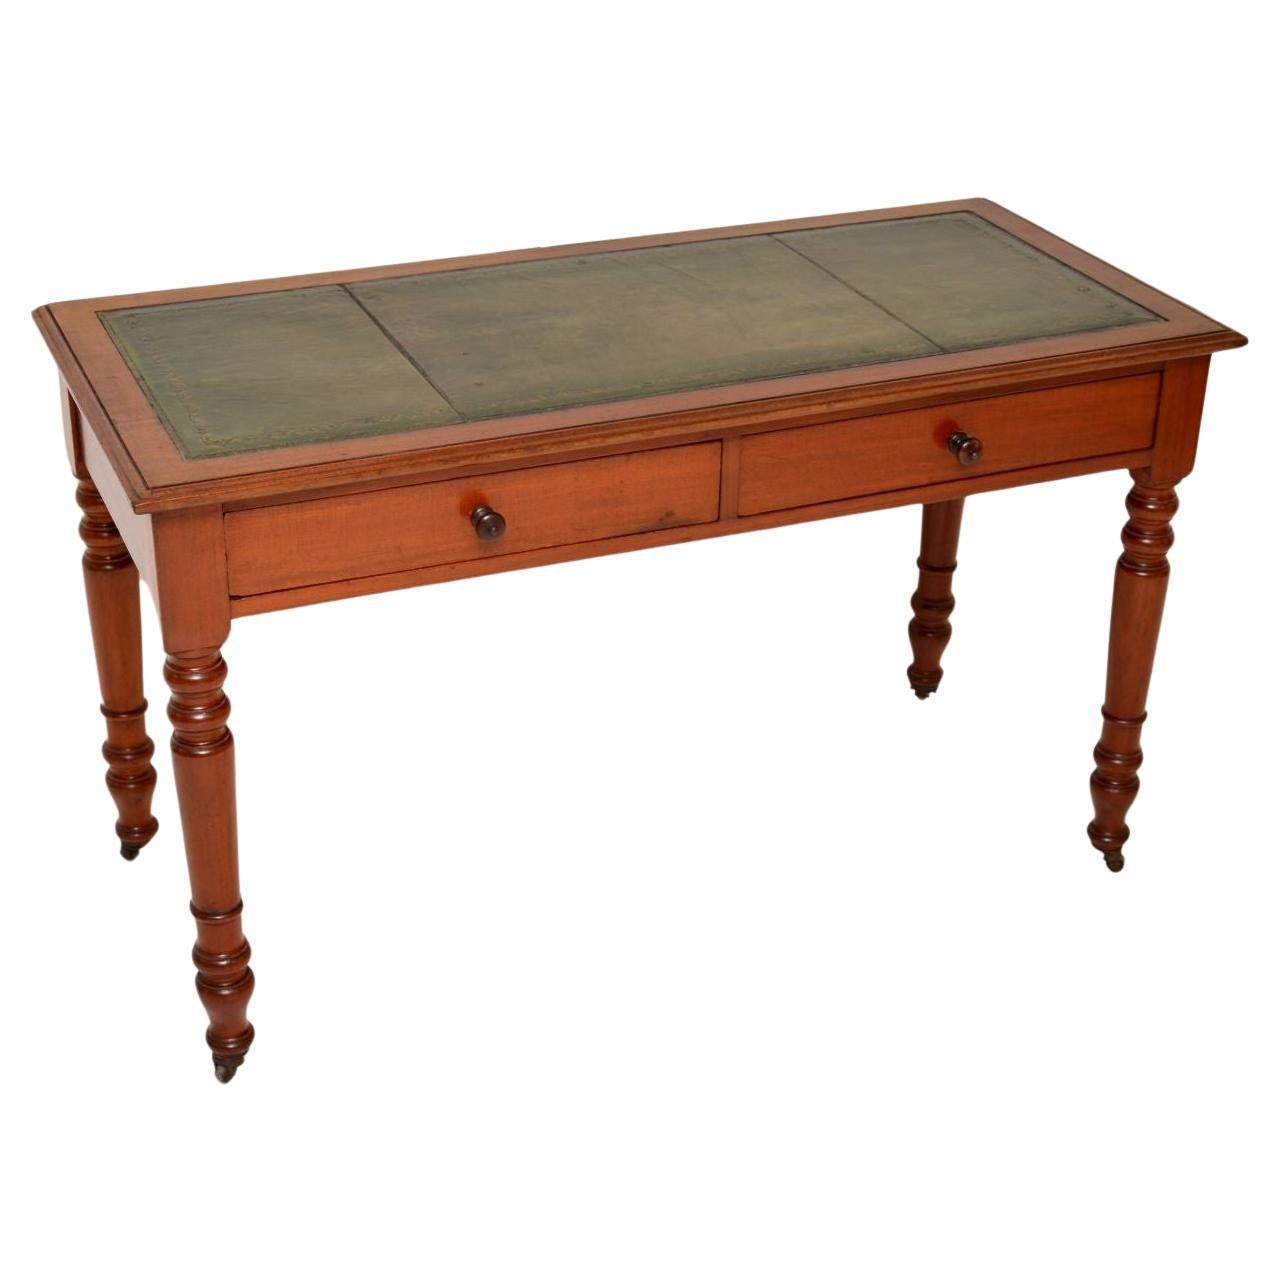 Antique Victorian Writing Table / Desk by James Shoolbred